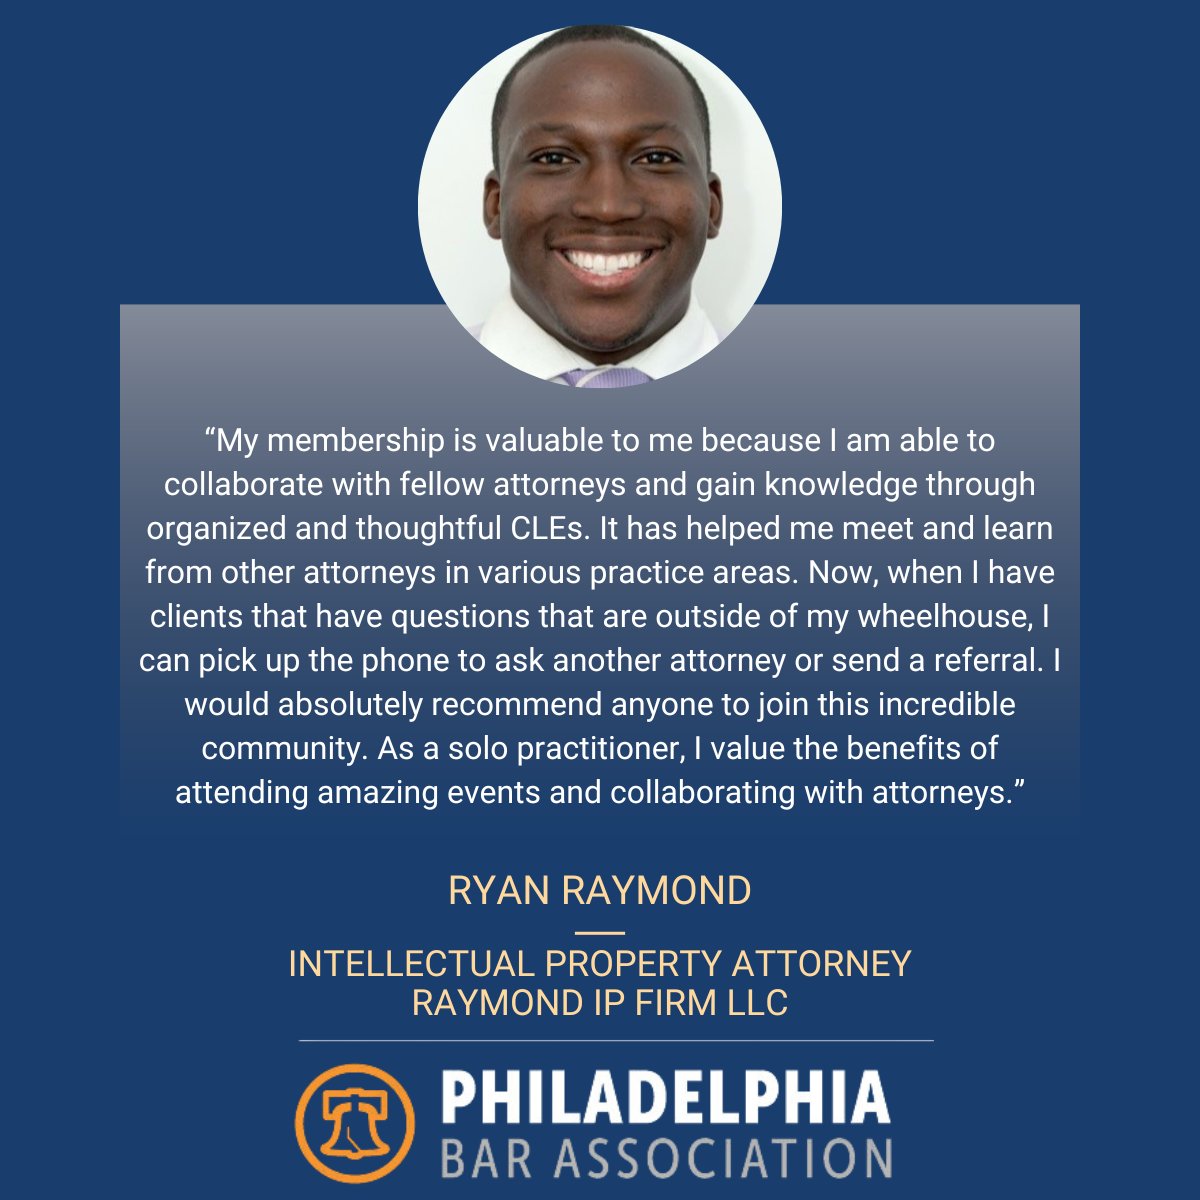 By engaging with diverse minds within the legal community, you broaden your perspectives and deepen your understanding of the legal landscape. 🌐 See what our member Ryan Raymond has to say about his membership👇 Join or renew your membership today: ow.ly/SIlh50QLTOK